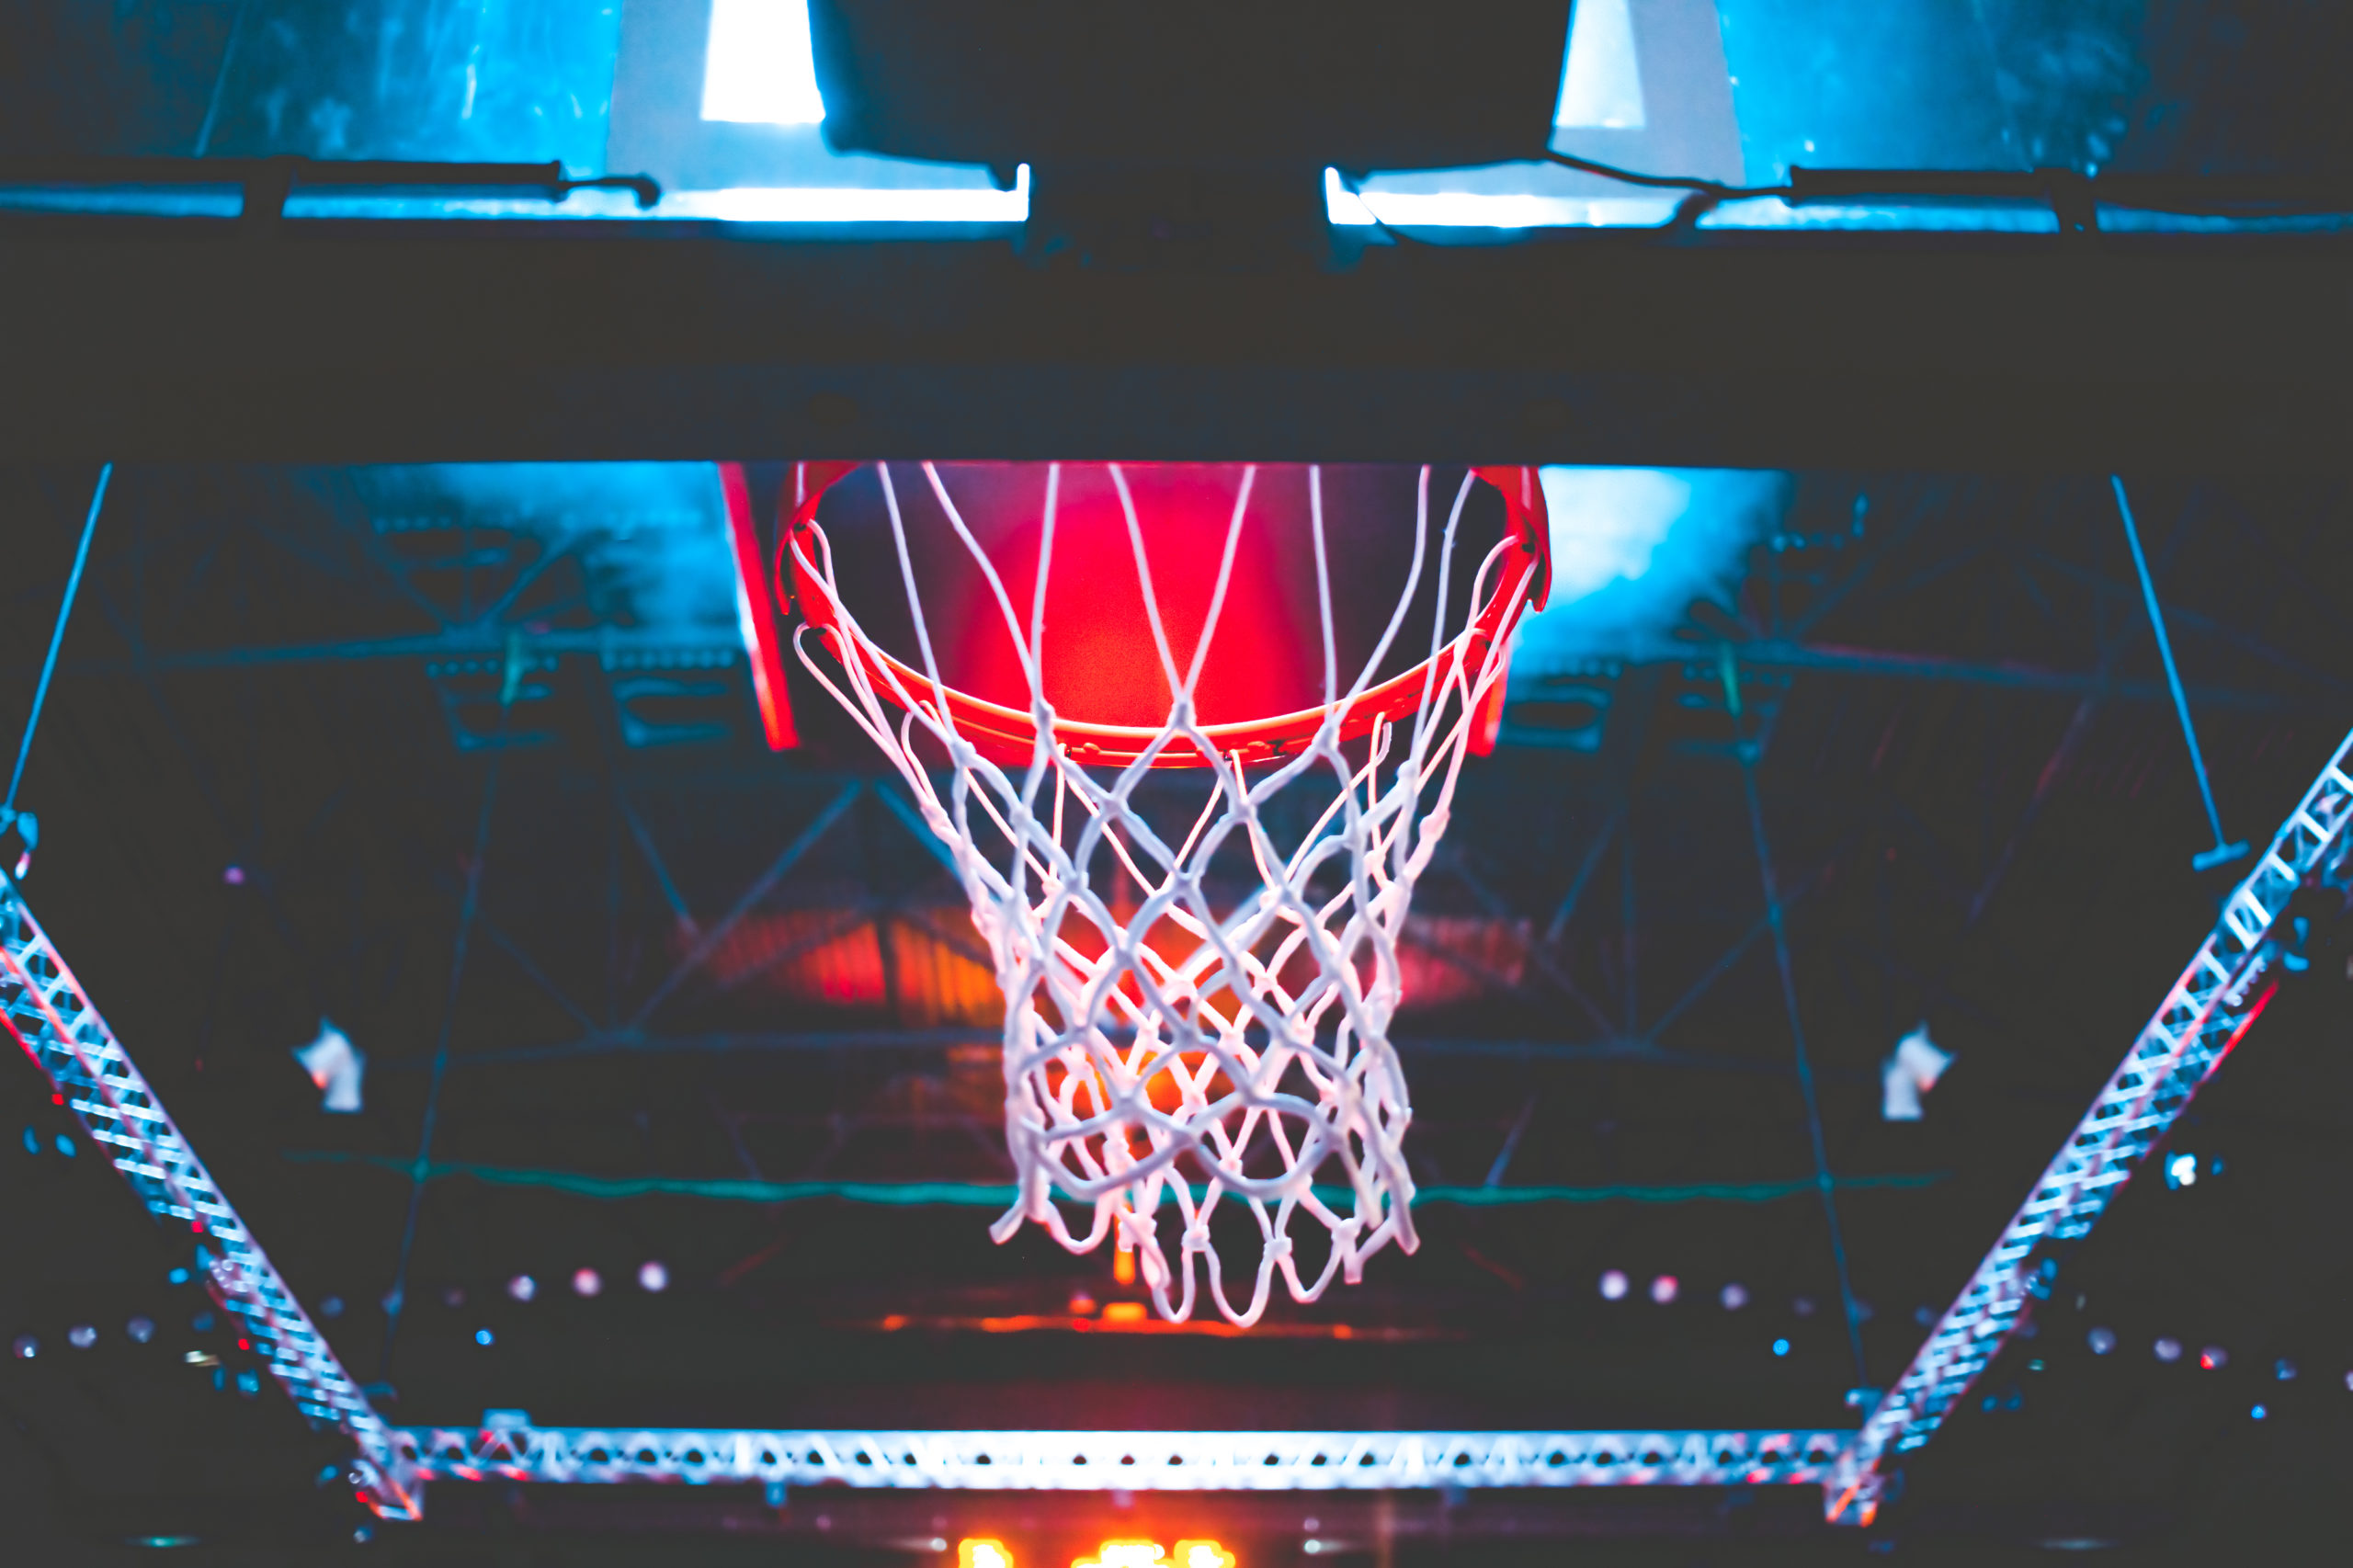 Slam dunk: How crypto brands are making a splash with the NBA–and fans